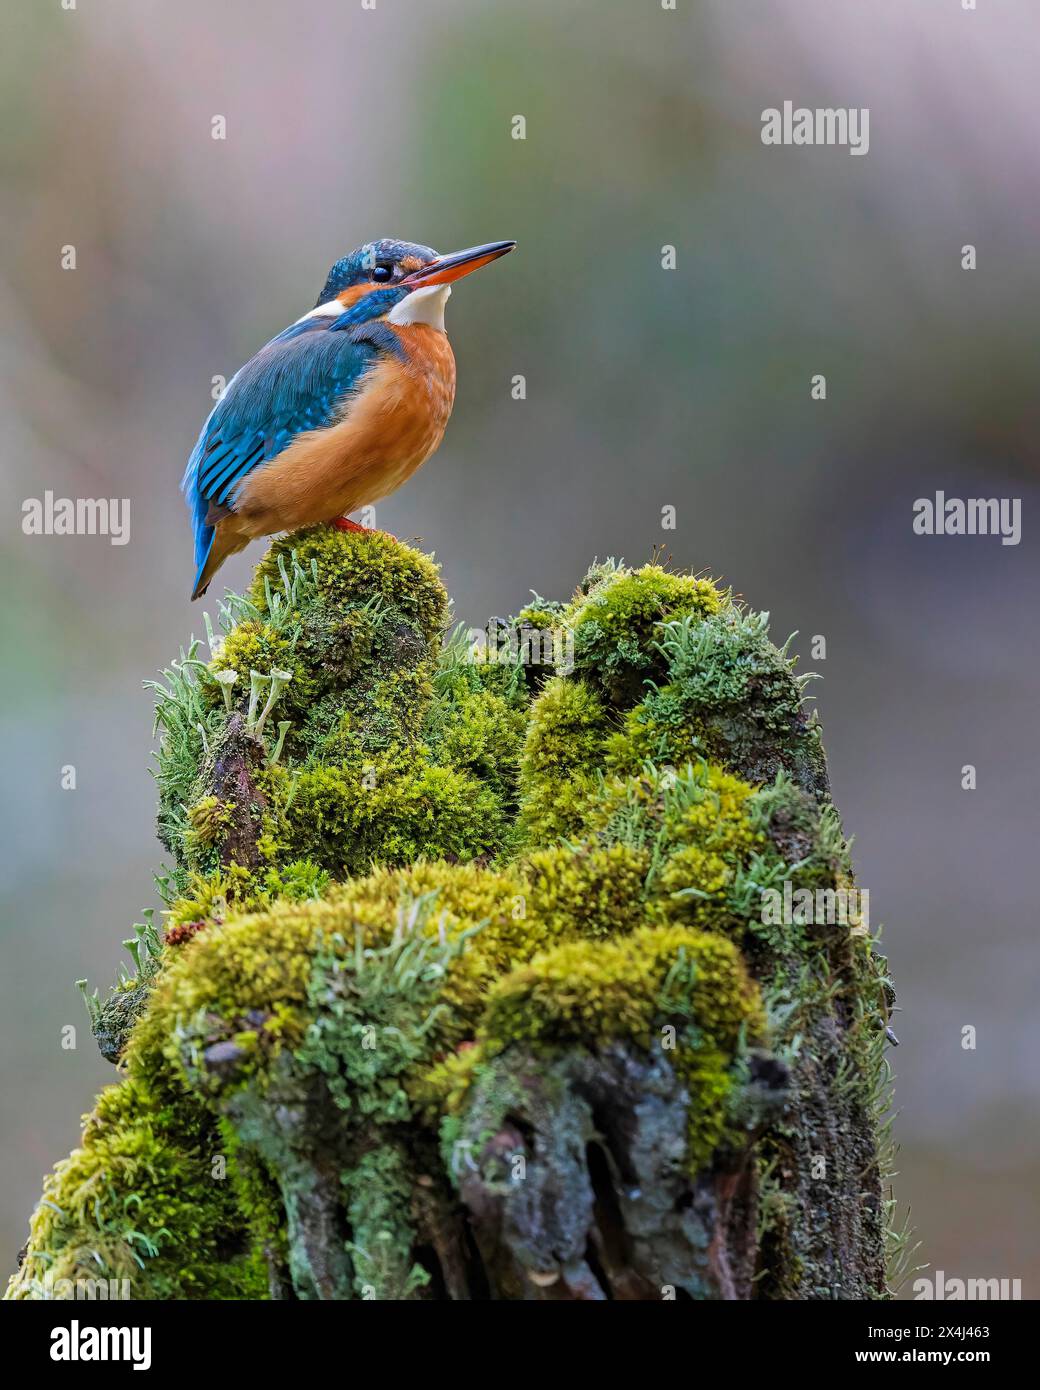 Common kingfisher (Alcedo atthis) Indicator of clean watercourses, pair formation, female animal, habitat, flying gem, Middle Elbe River Landscape Stock Photo